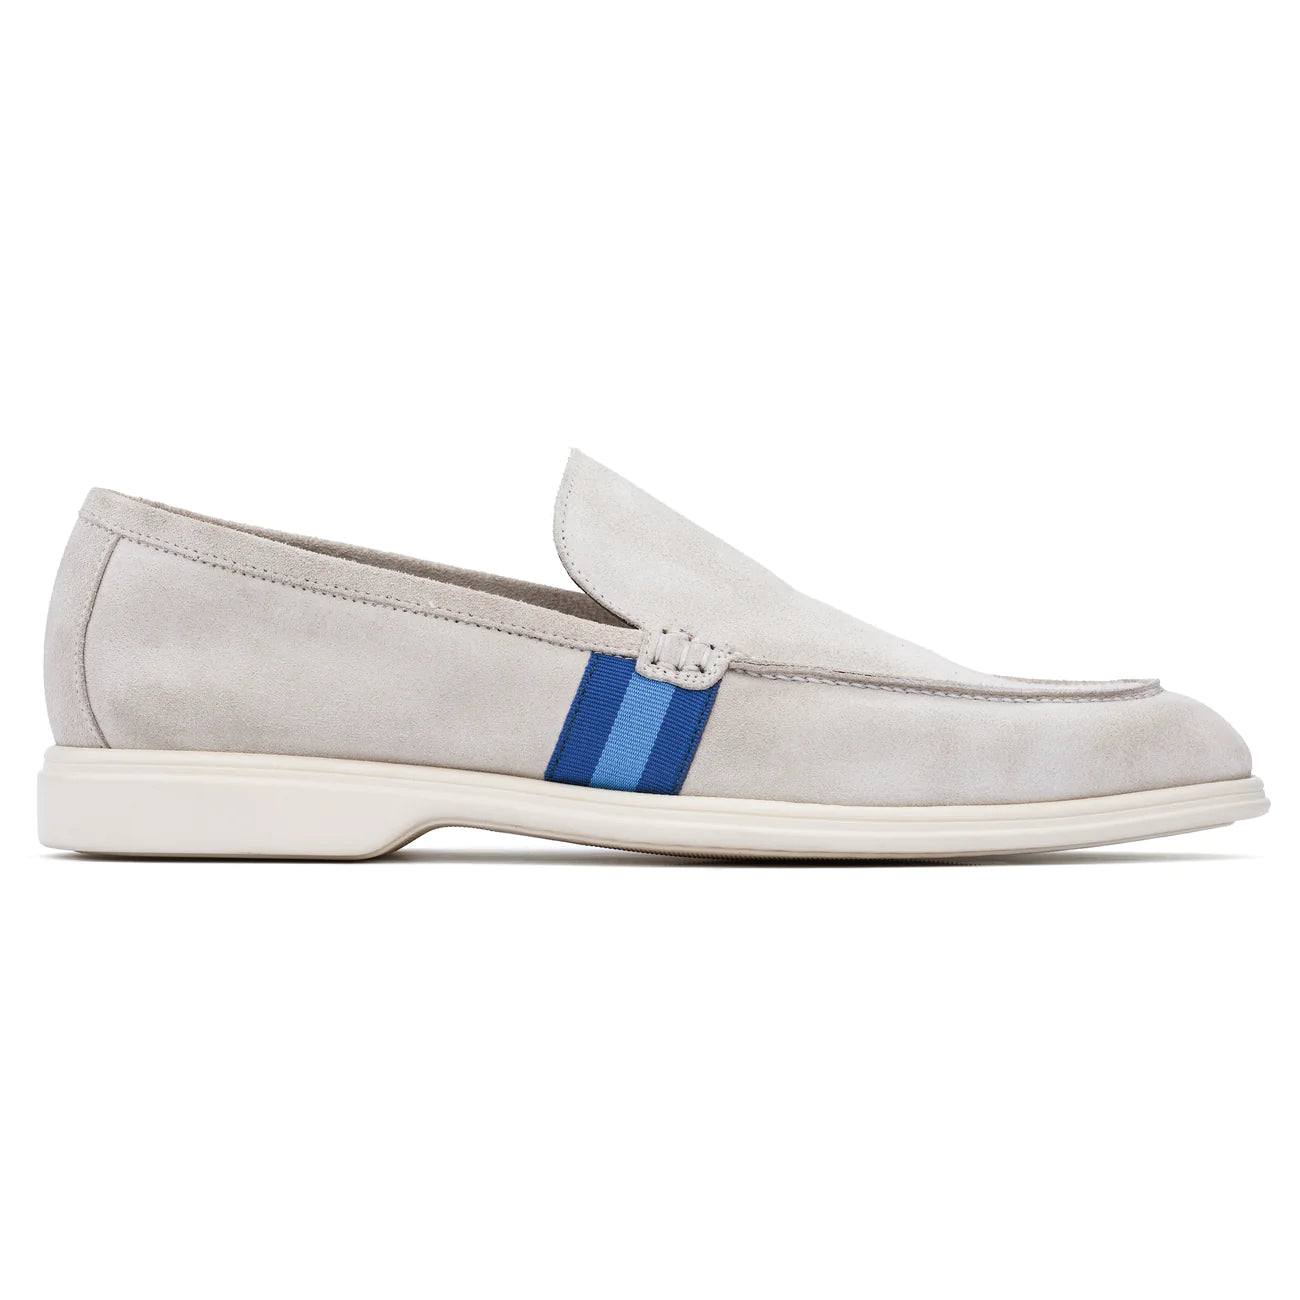 To Boot Matteo Ice Suede Loafer